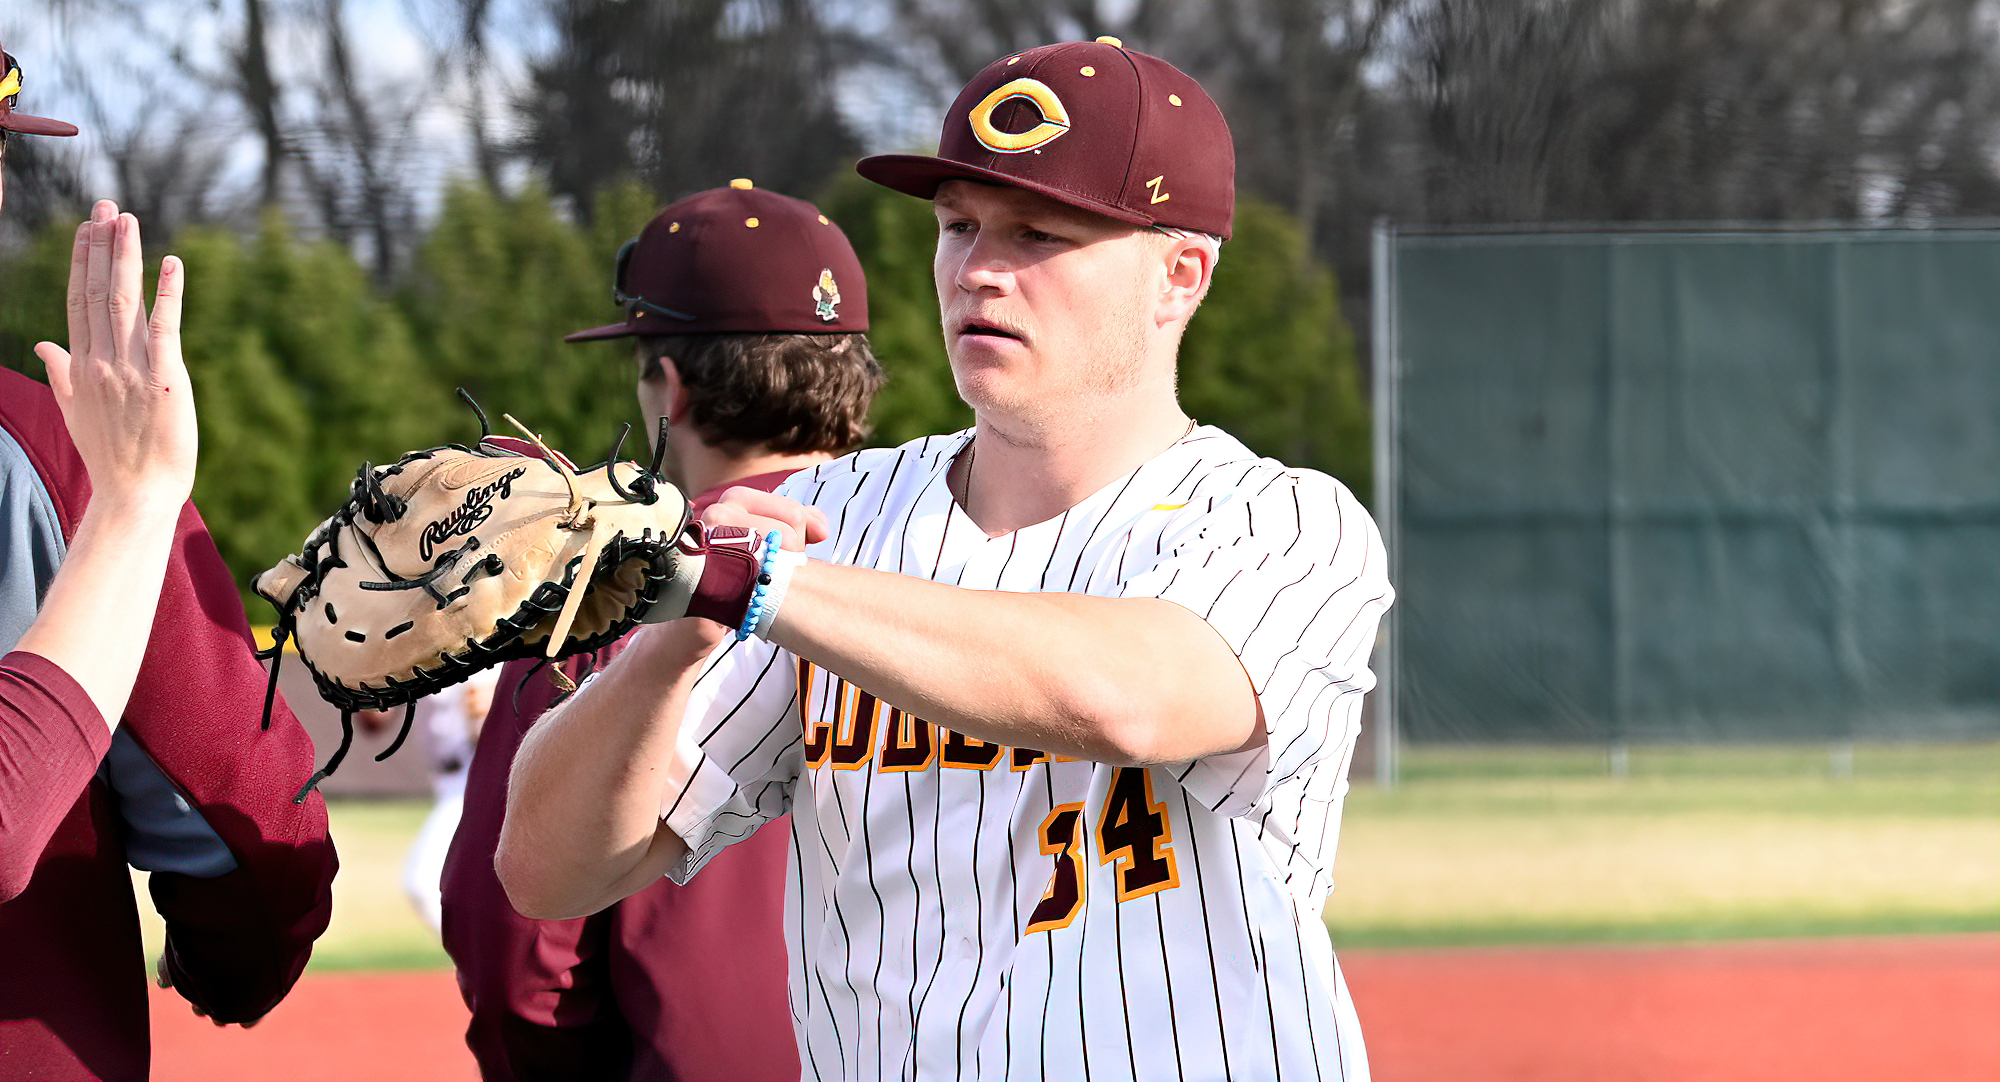 Freshman Ben Shumansky had the game-winning hit in Game 1 and went 3-for-4 in Game 2 in the Cobbers' sweep over Carleton.